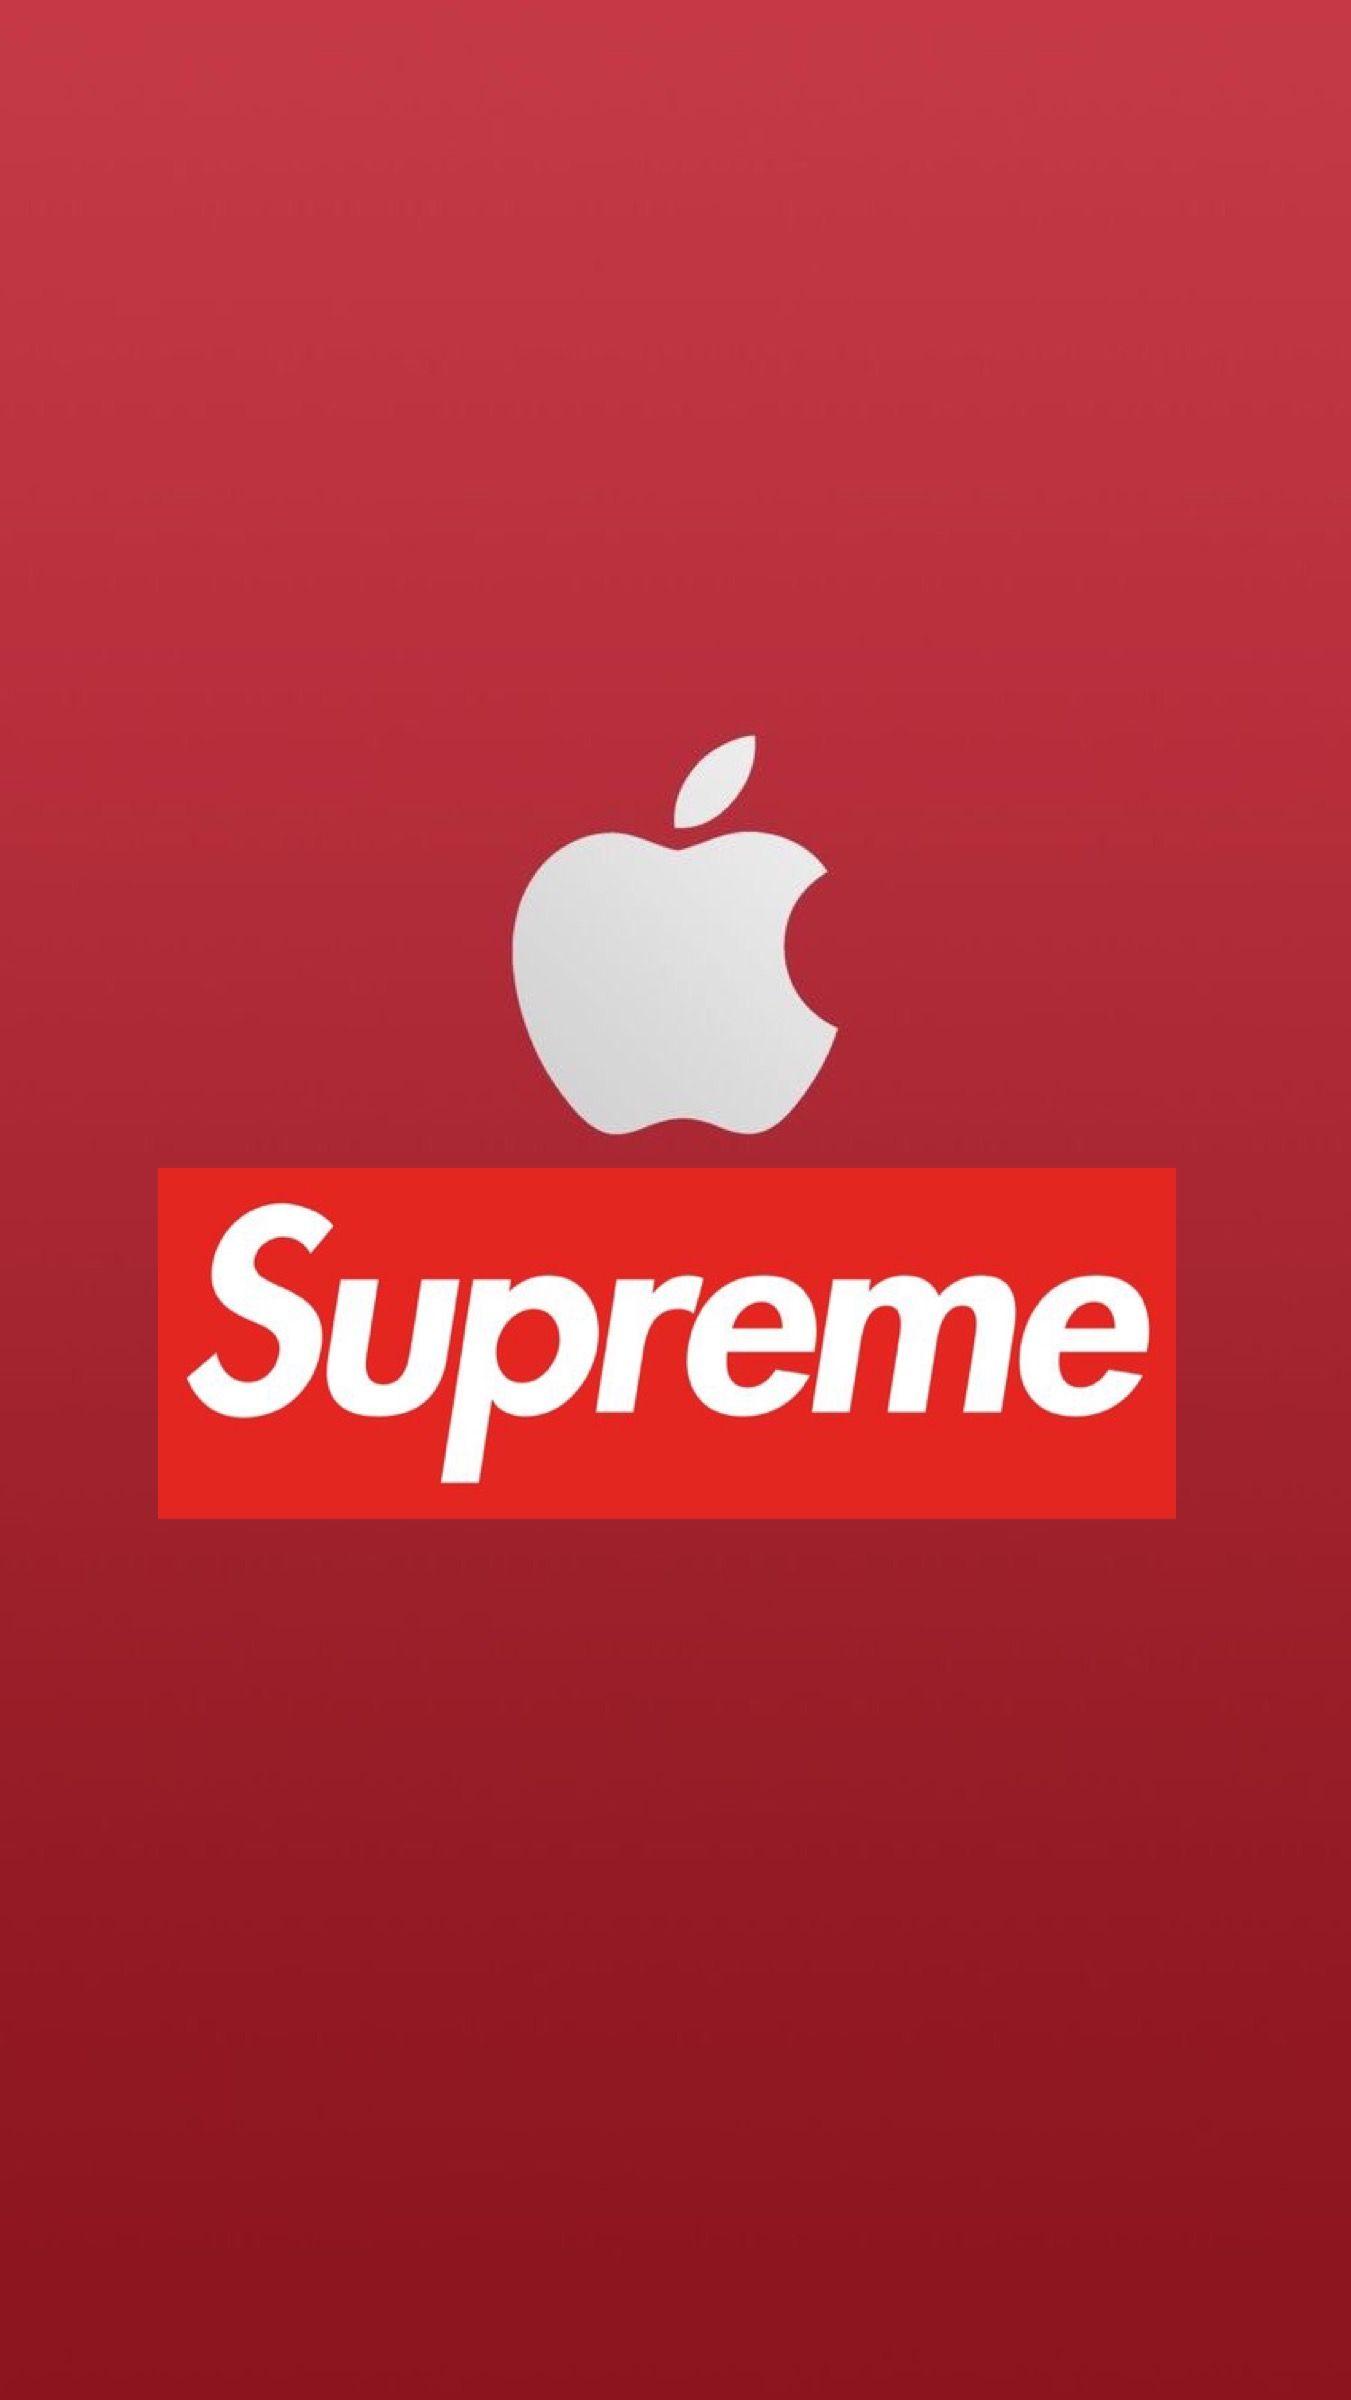 Supreme Apple Watch Wallpapers - Wallpaper Cave